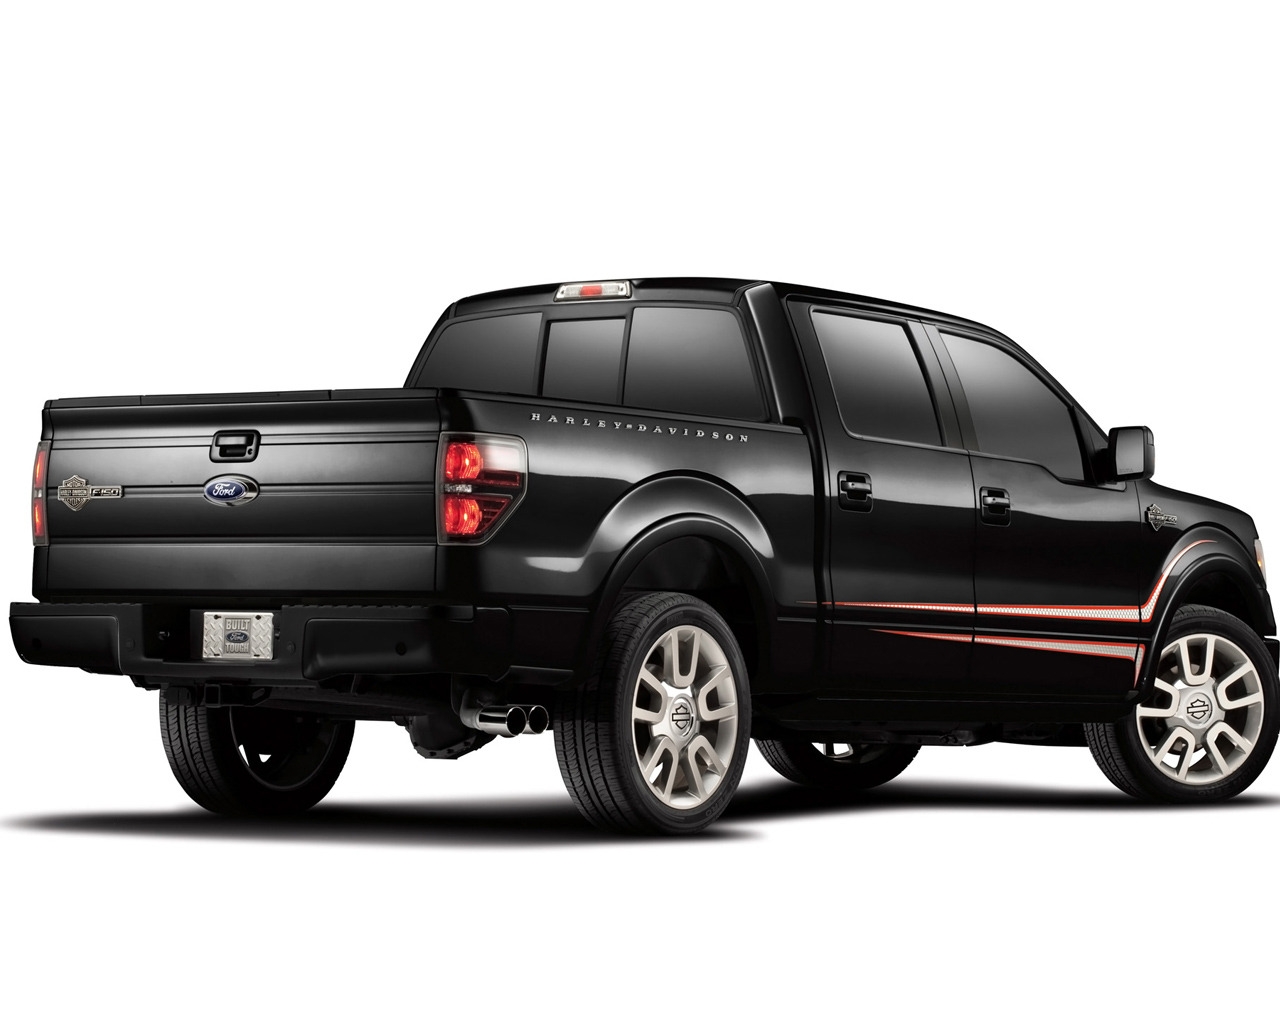 Ford Harley Davidson F 150 Rear Angle for 1280 x 1024 resolution